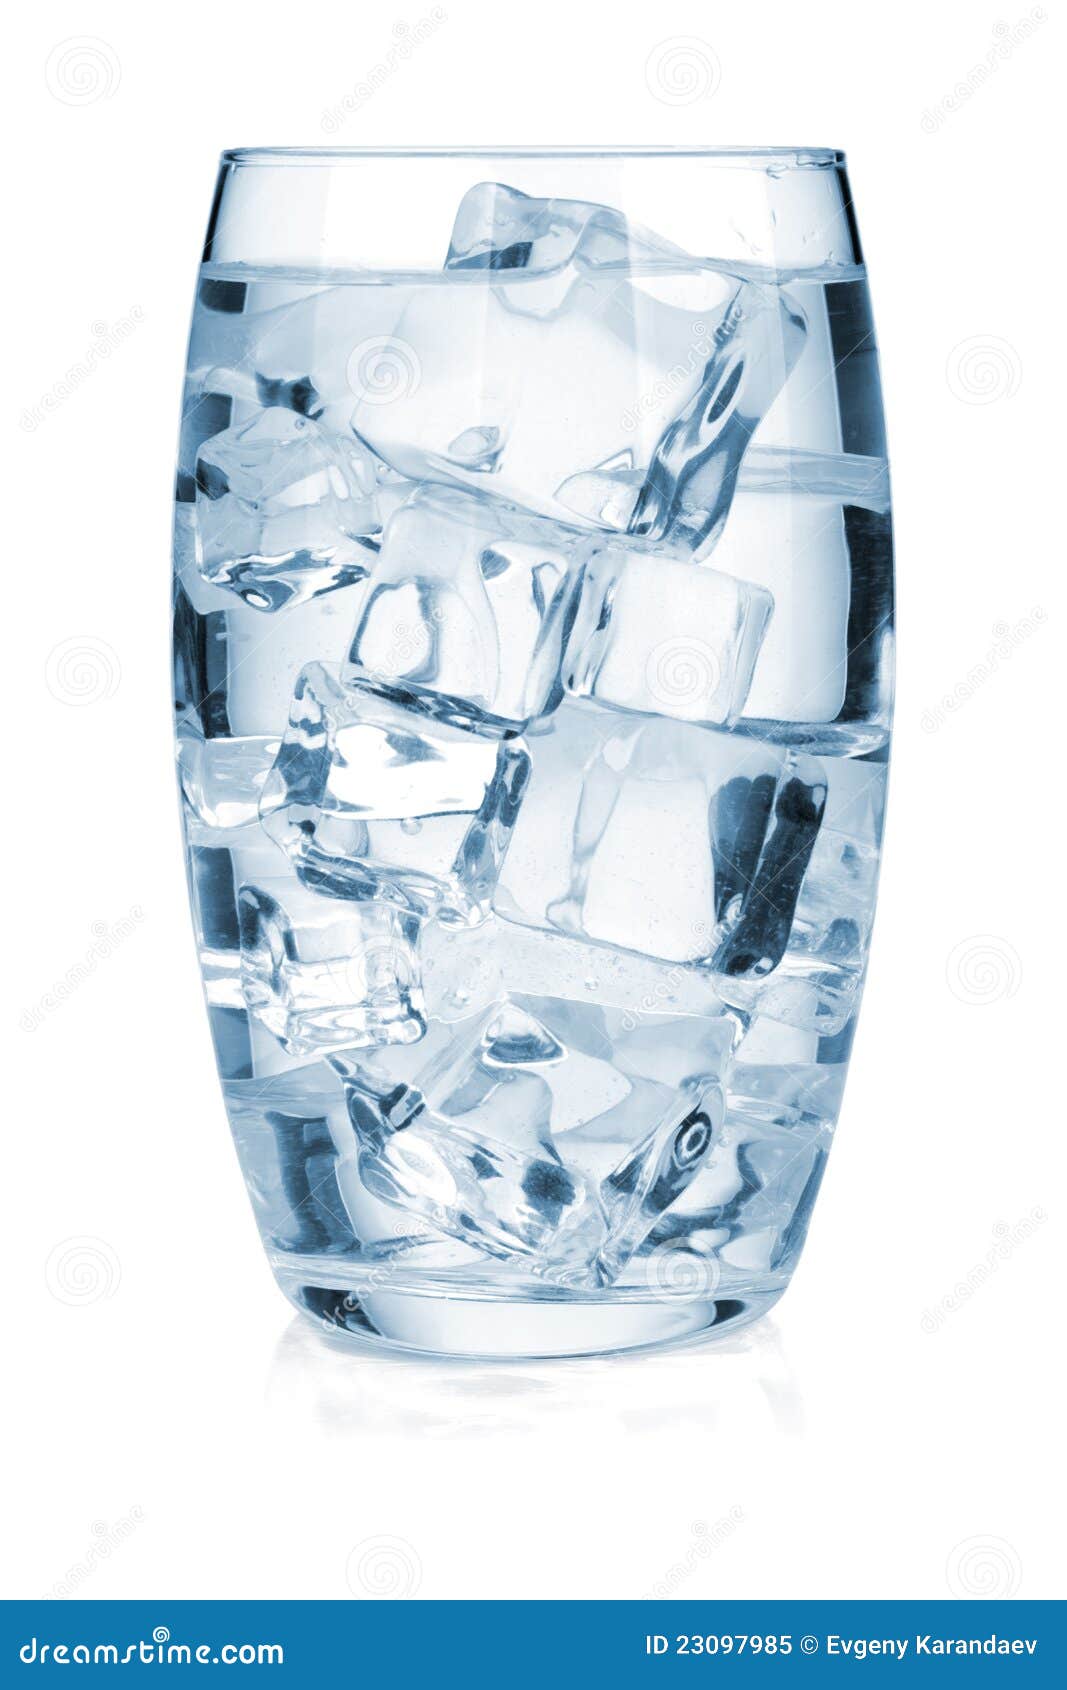 clipart glass of ice - photo #7